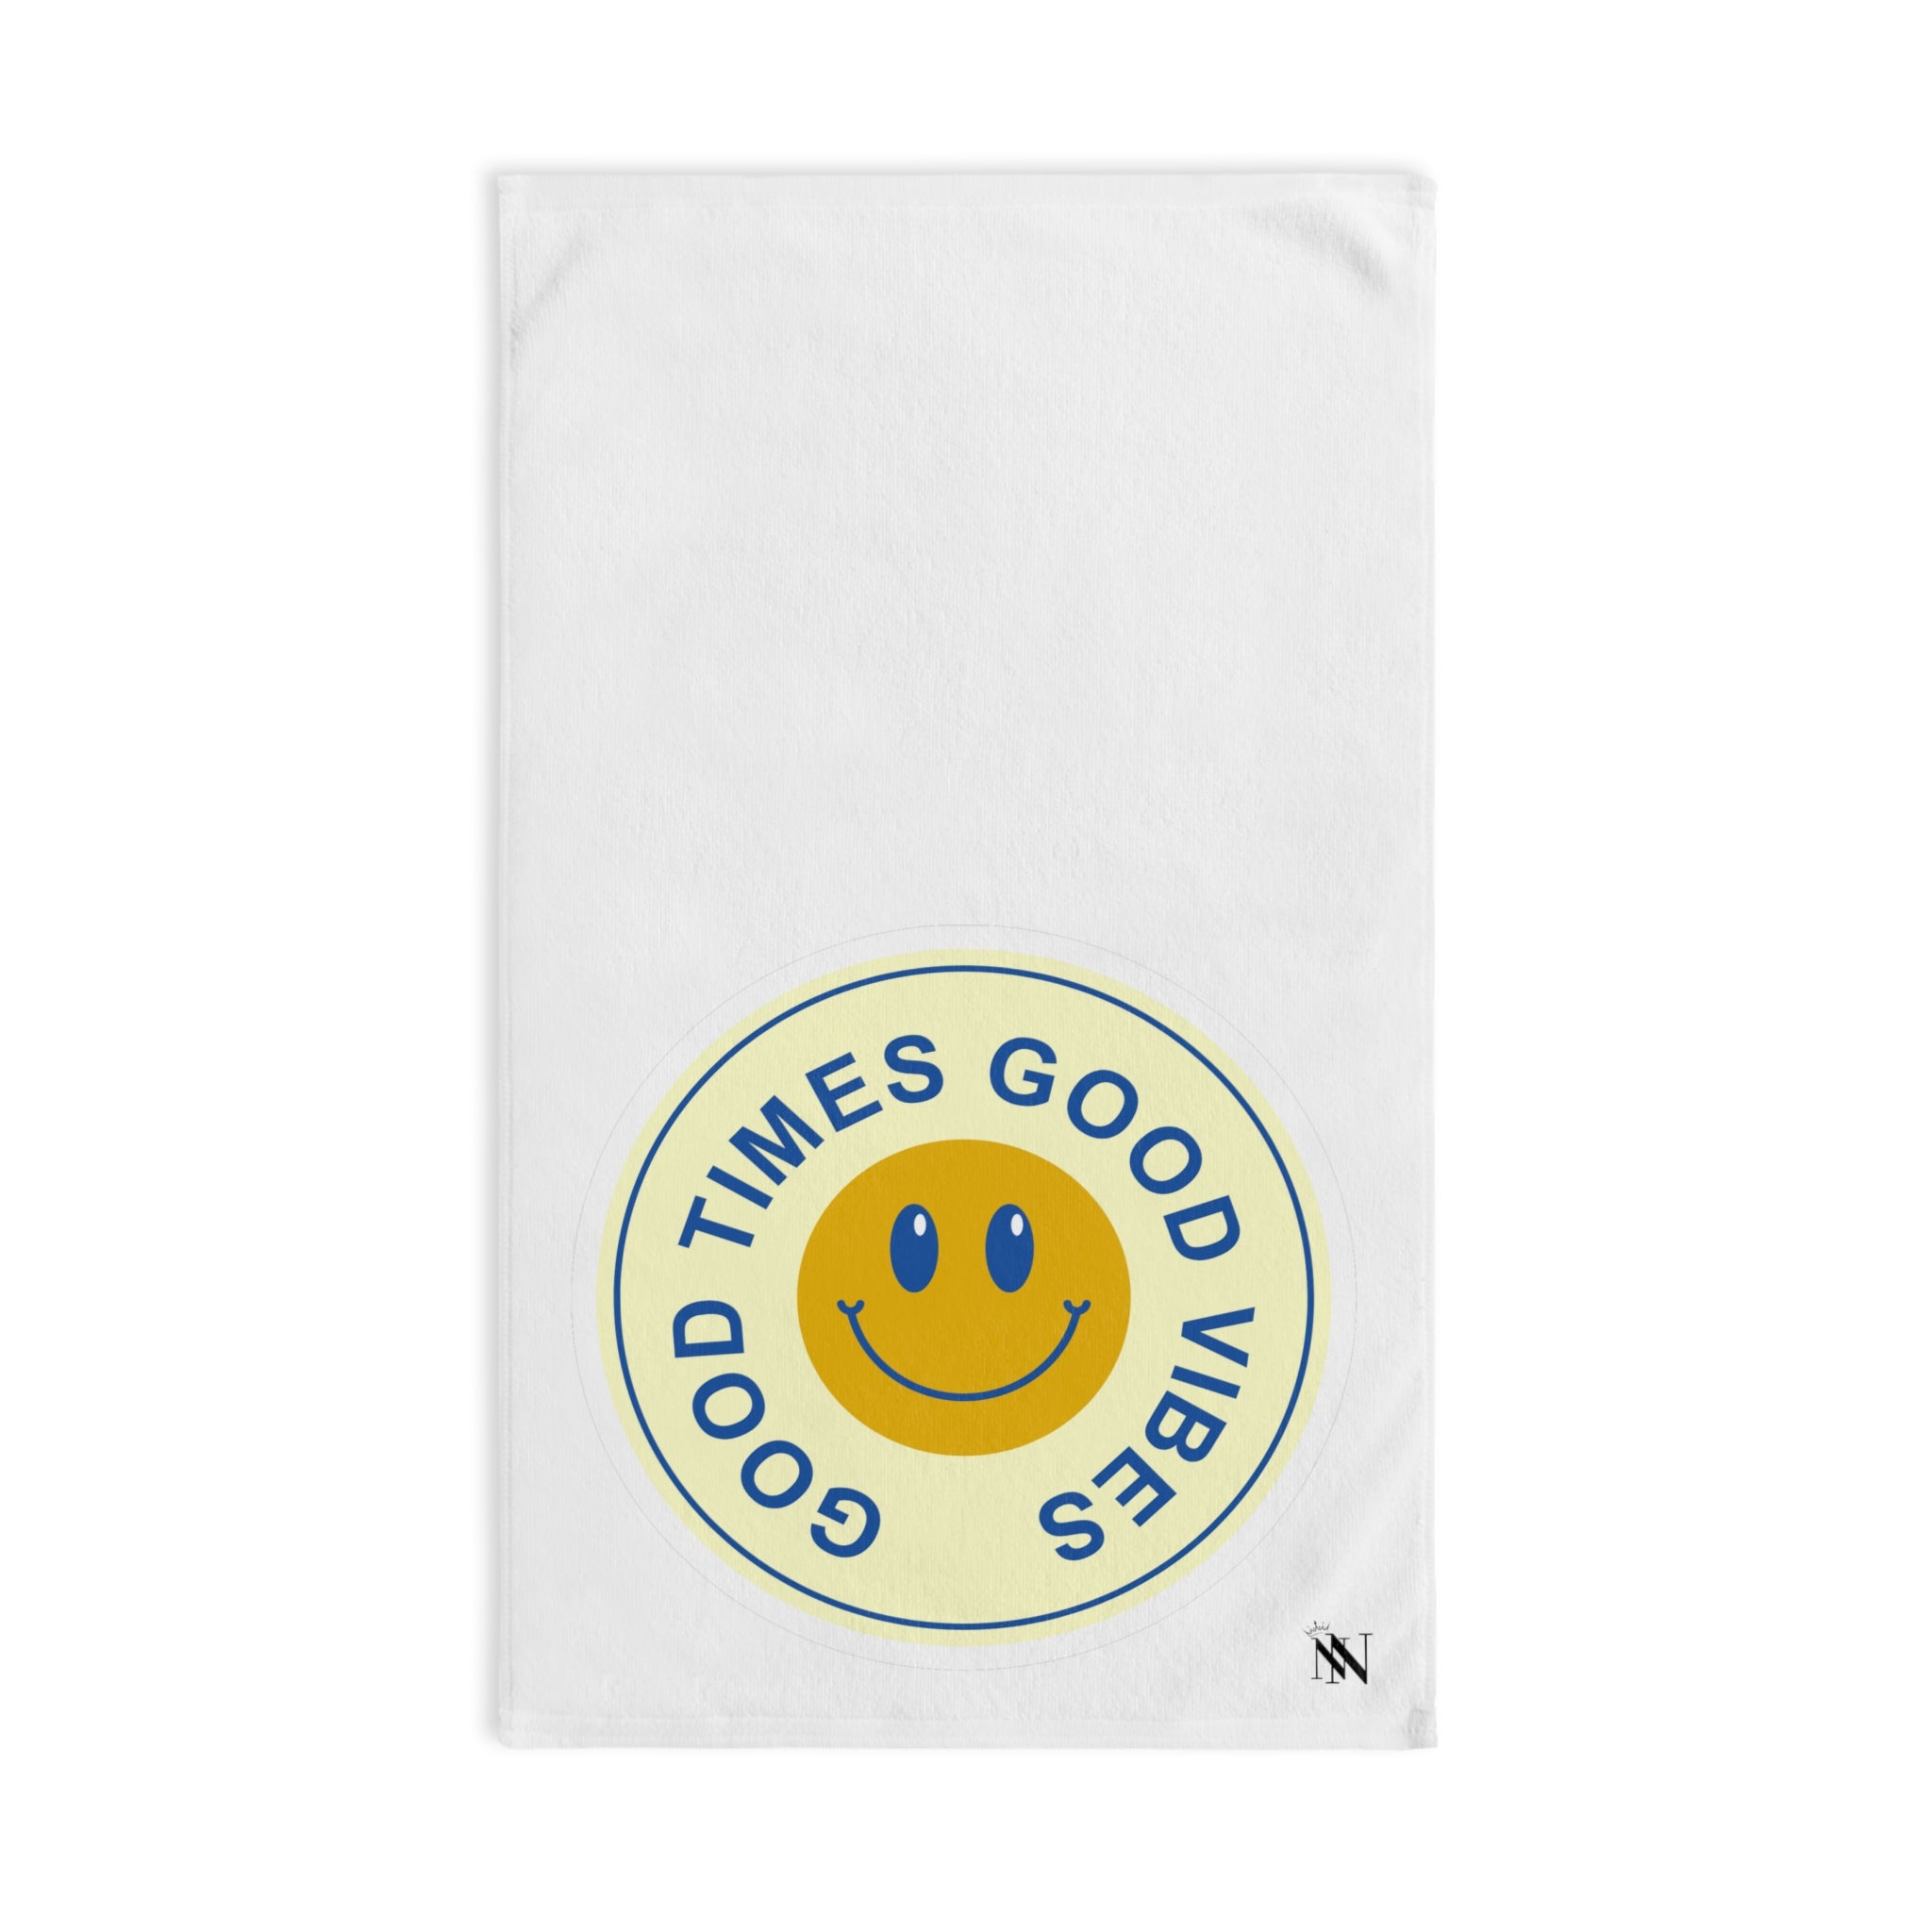 Times Good  SmileWhite | Funny Gifts for Men - Gifts for Him - Birthday Gifts for Men, Him, Her, Husband, Boyfriend, Girlfriend, New Couple Gifts, Fathers & Valentines Day Gifts, Christmas Gifts NECTAR NAPKINS